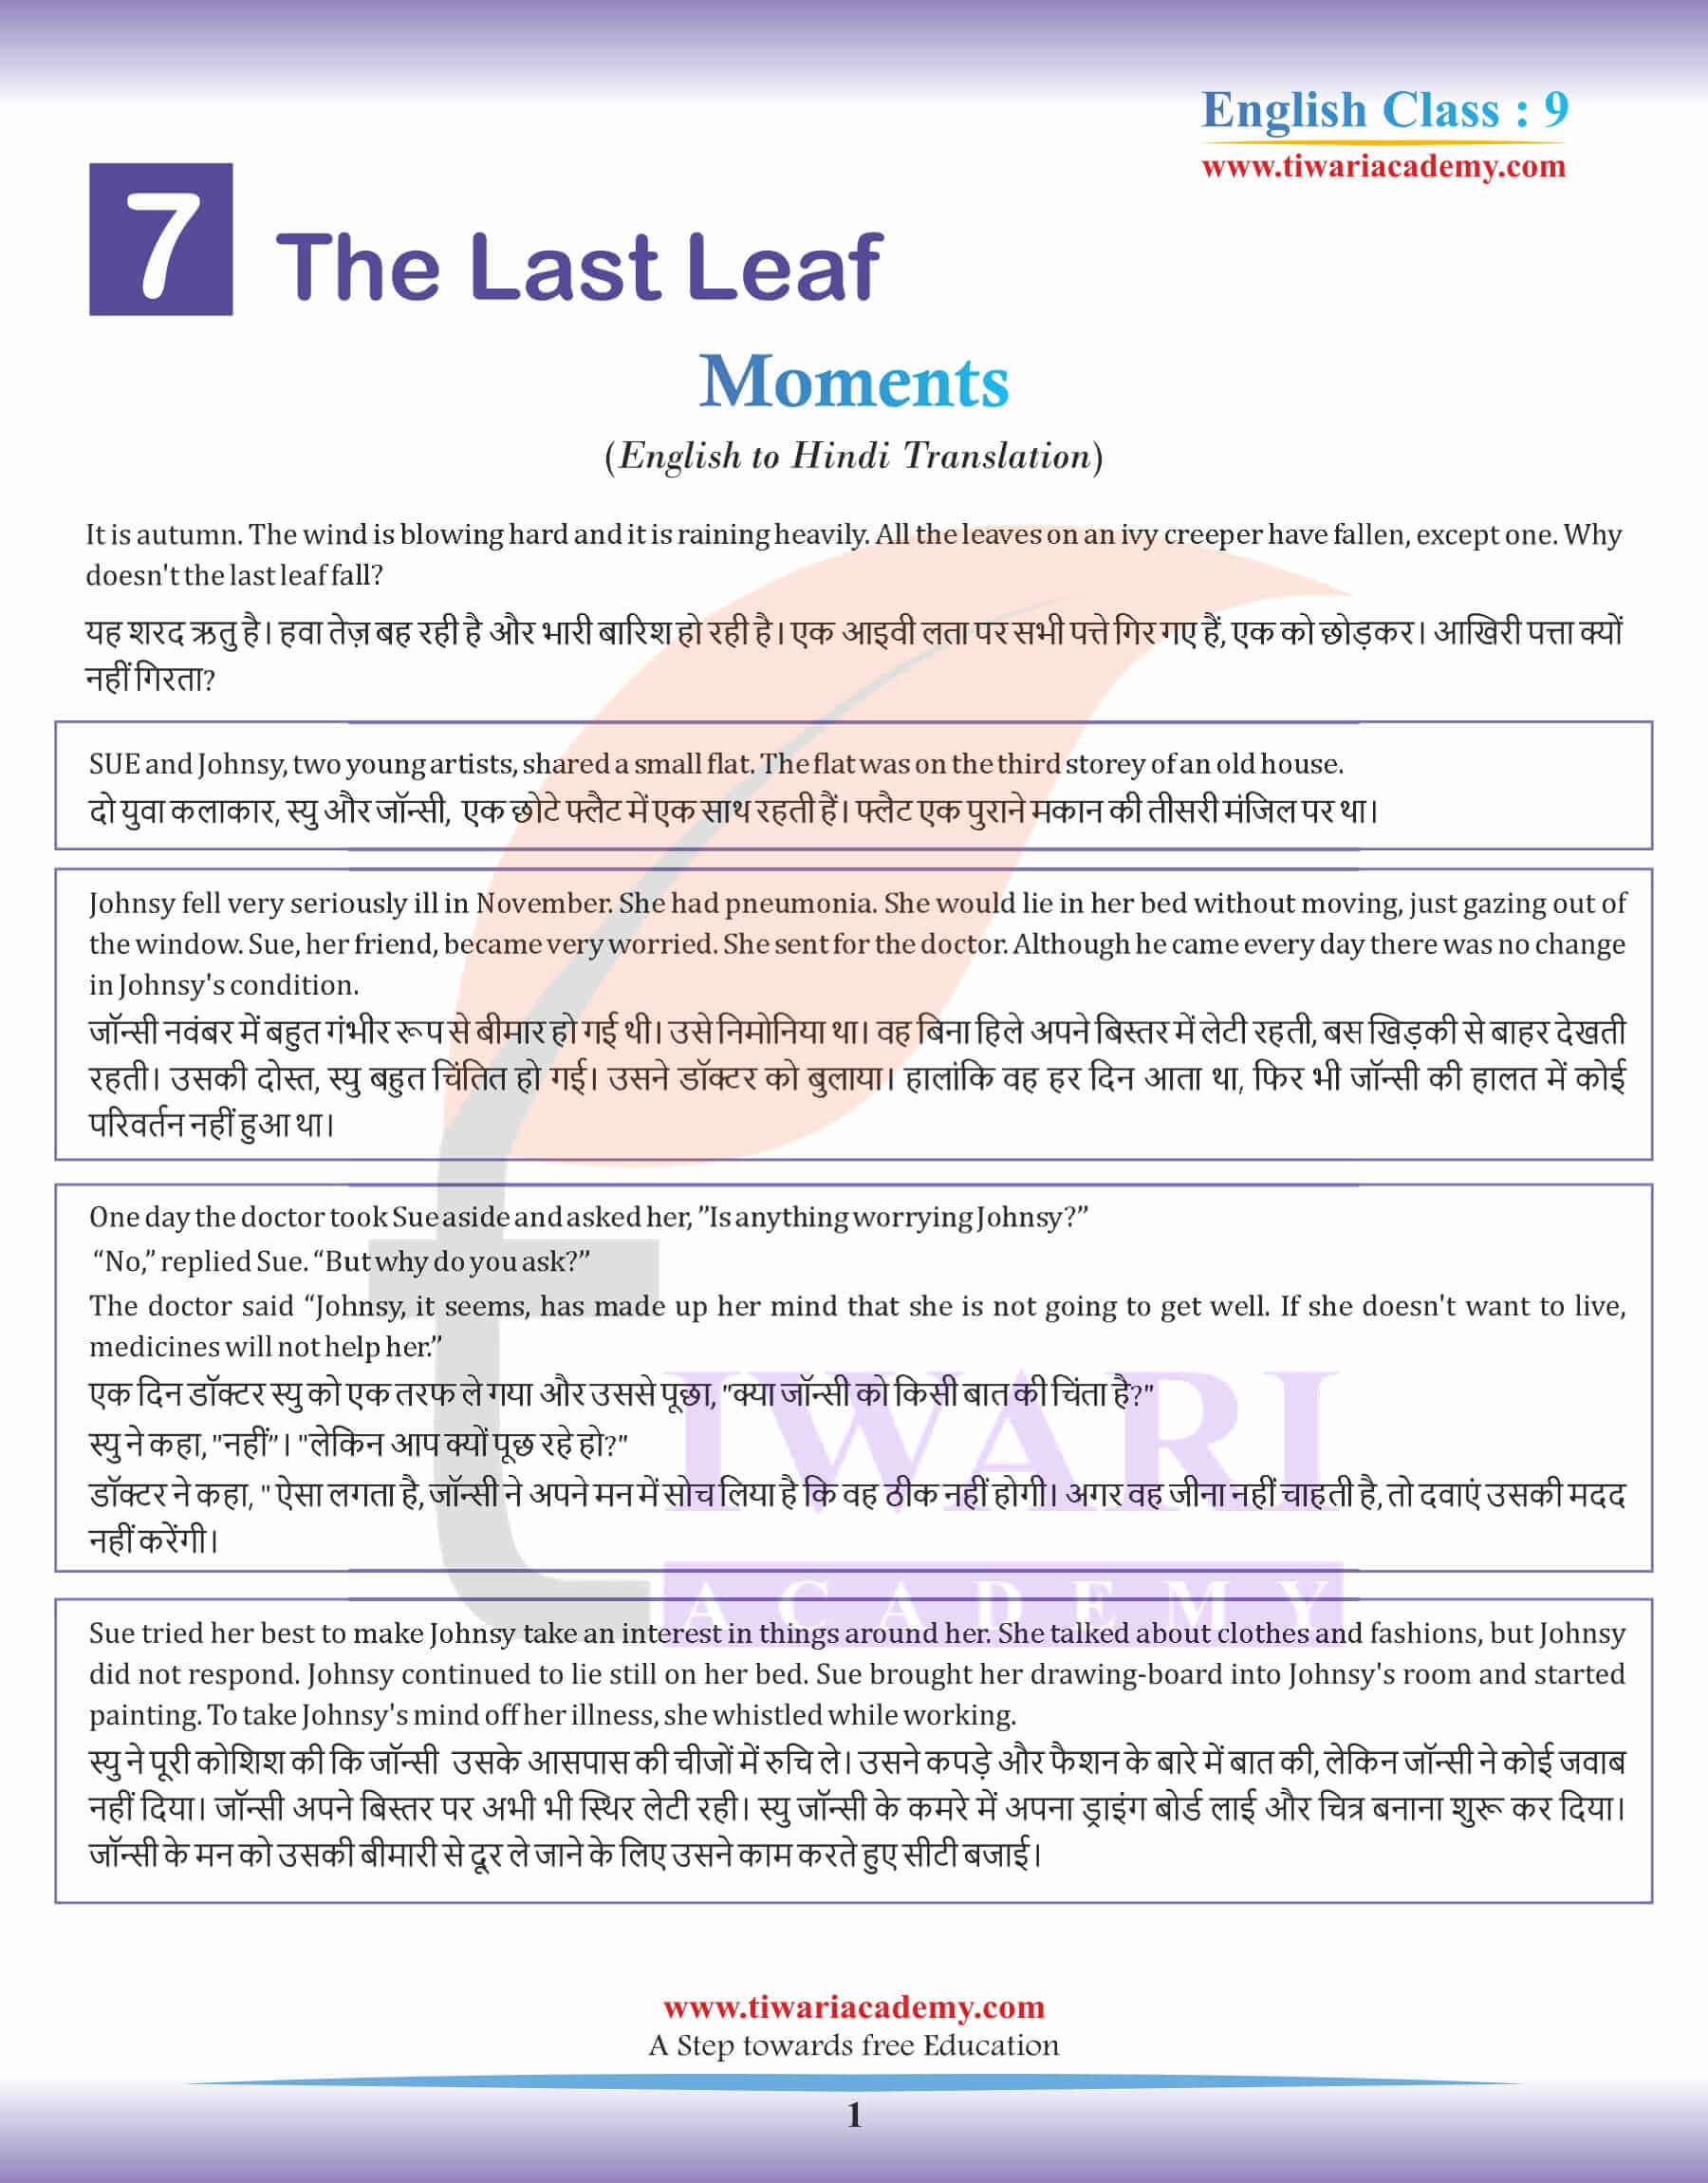 Class 9 English Moments Chapter 7 the Last leaf